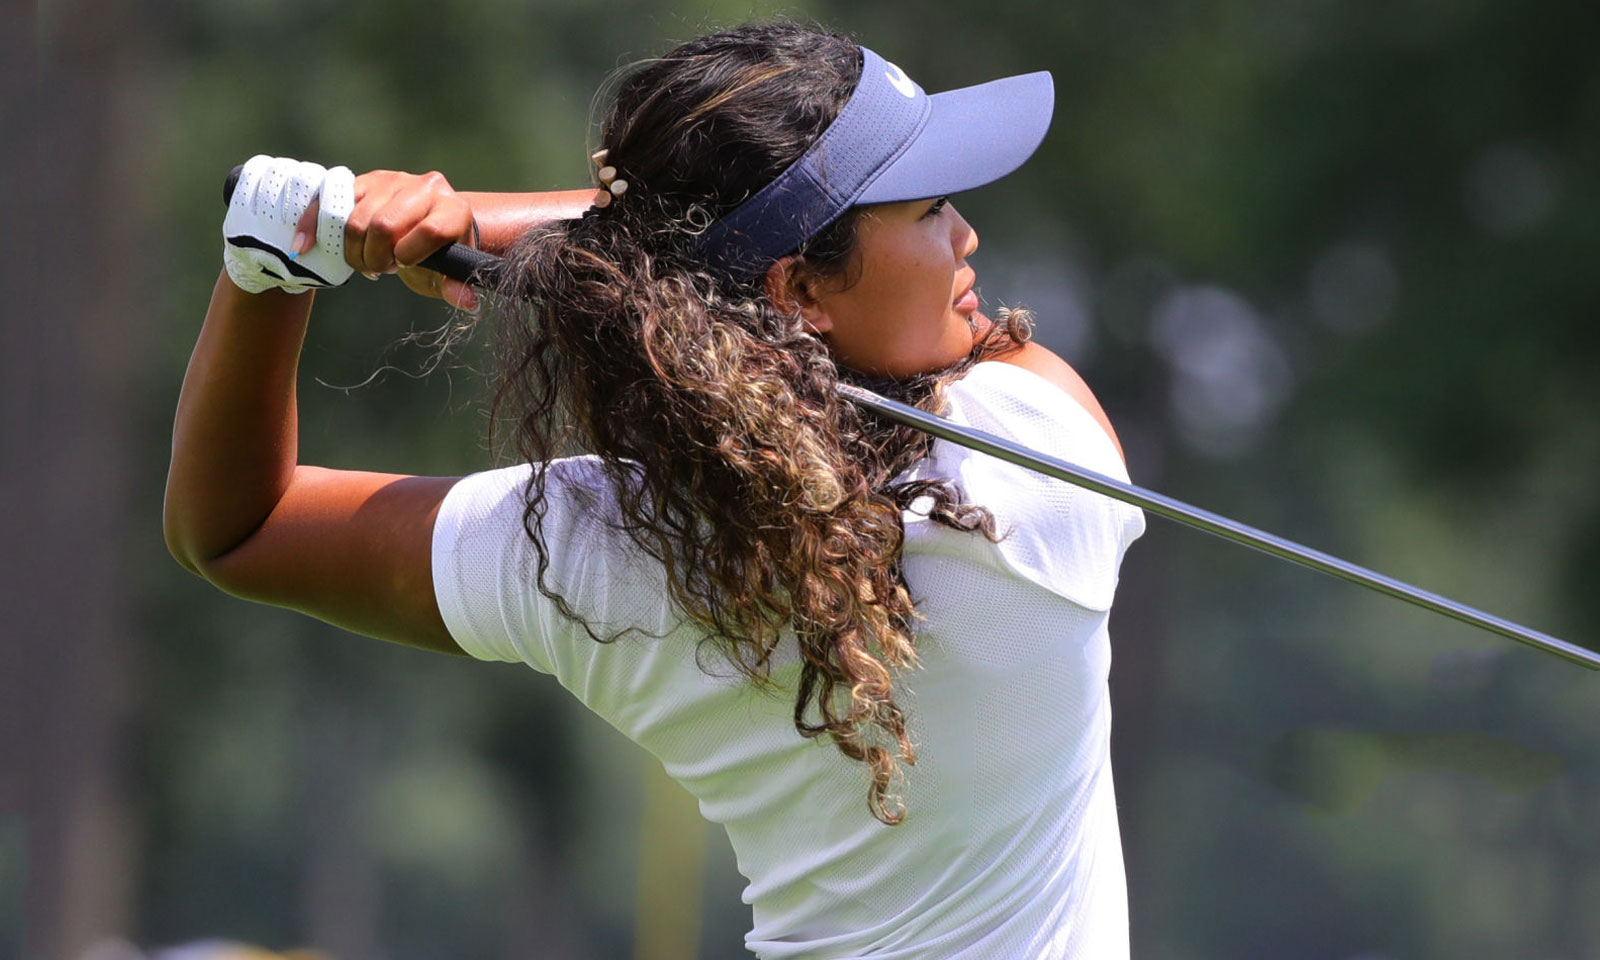 Amari-Avery-Makes-Her-LPGA-Exemption-Debut-at-2021-Founders-Cup